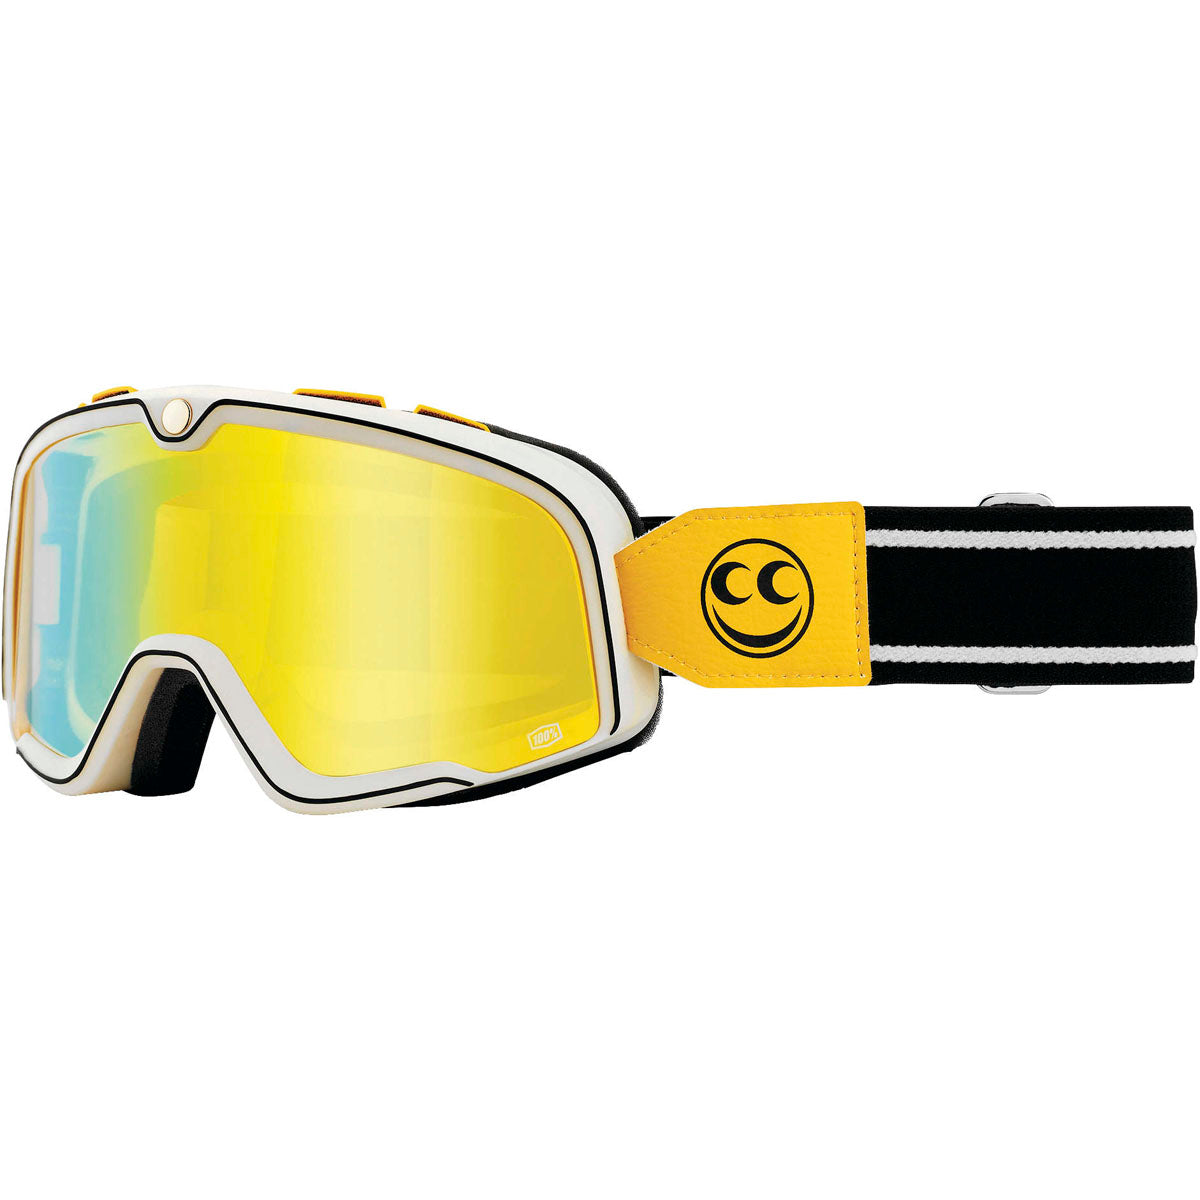 100% Barstow Goggles See See / Flash Yellow Lens